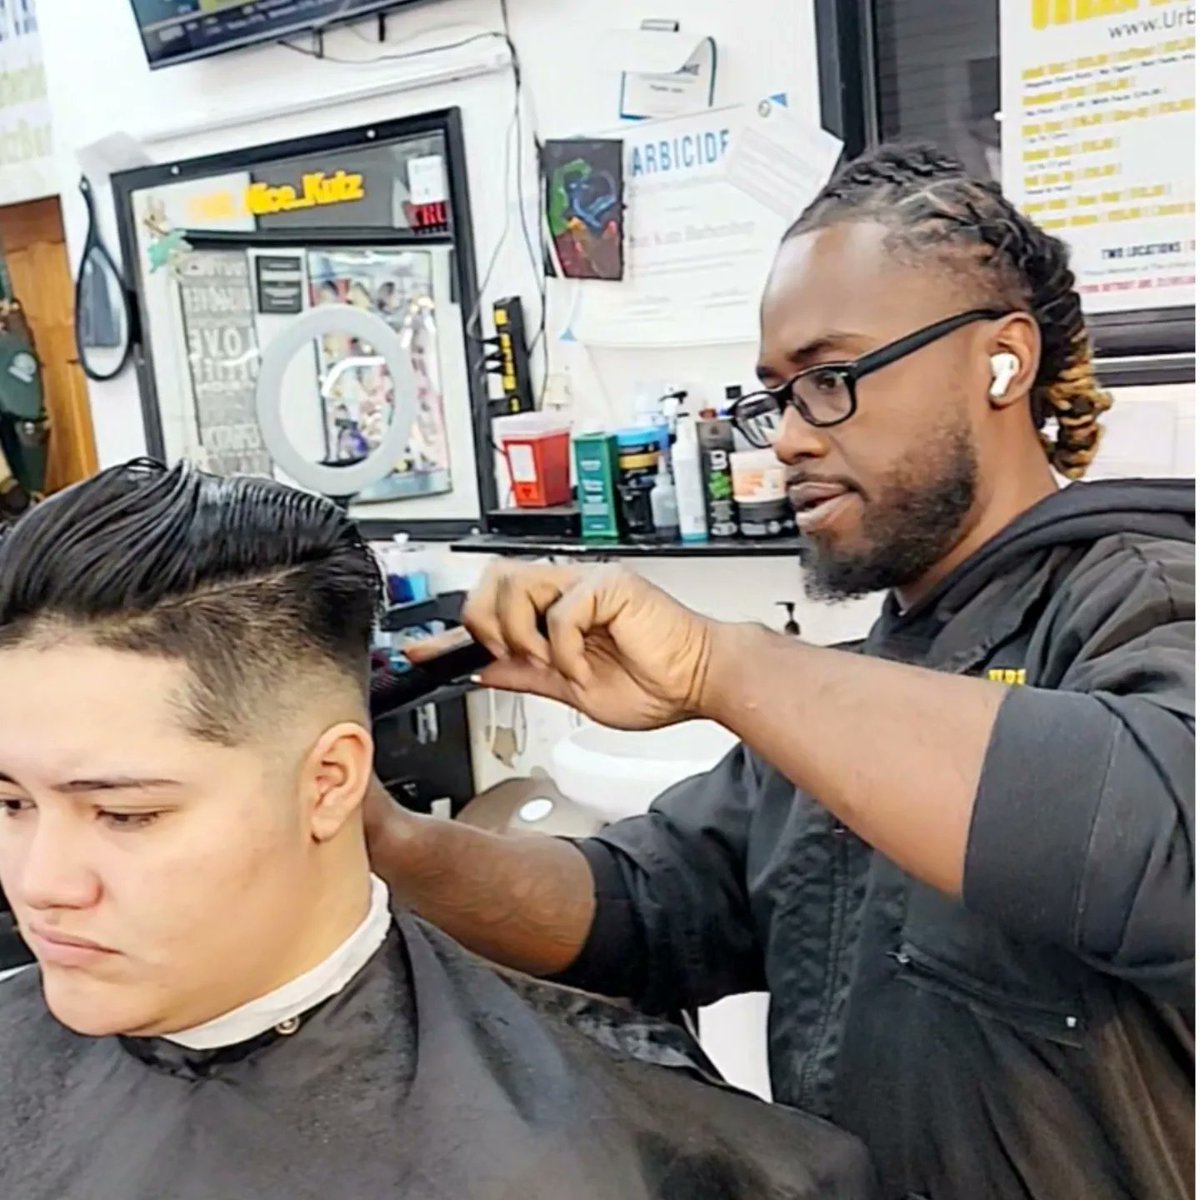 @gheado_thebarber from our 4491 Pearl Rd location 216-661-KUTZ works those shears . YUP WE TAKE WALKINSbut book it UrbanKutzBarbershop.com #thisiscle #thisiscleveland #ClevelandBrowns #ClevelandsBestBarber #thisiscle #cle #BestBarbershopInCleveland